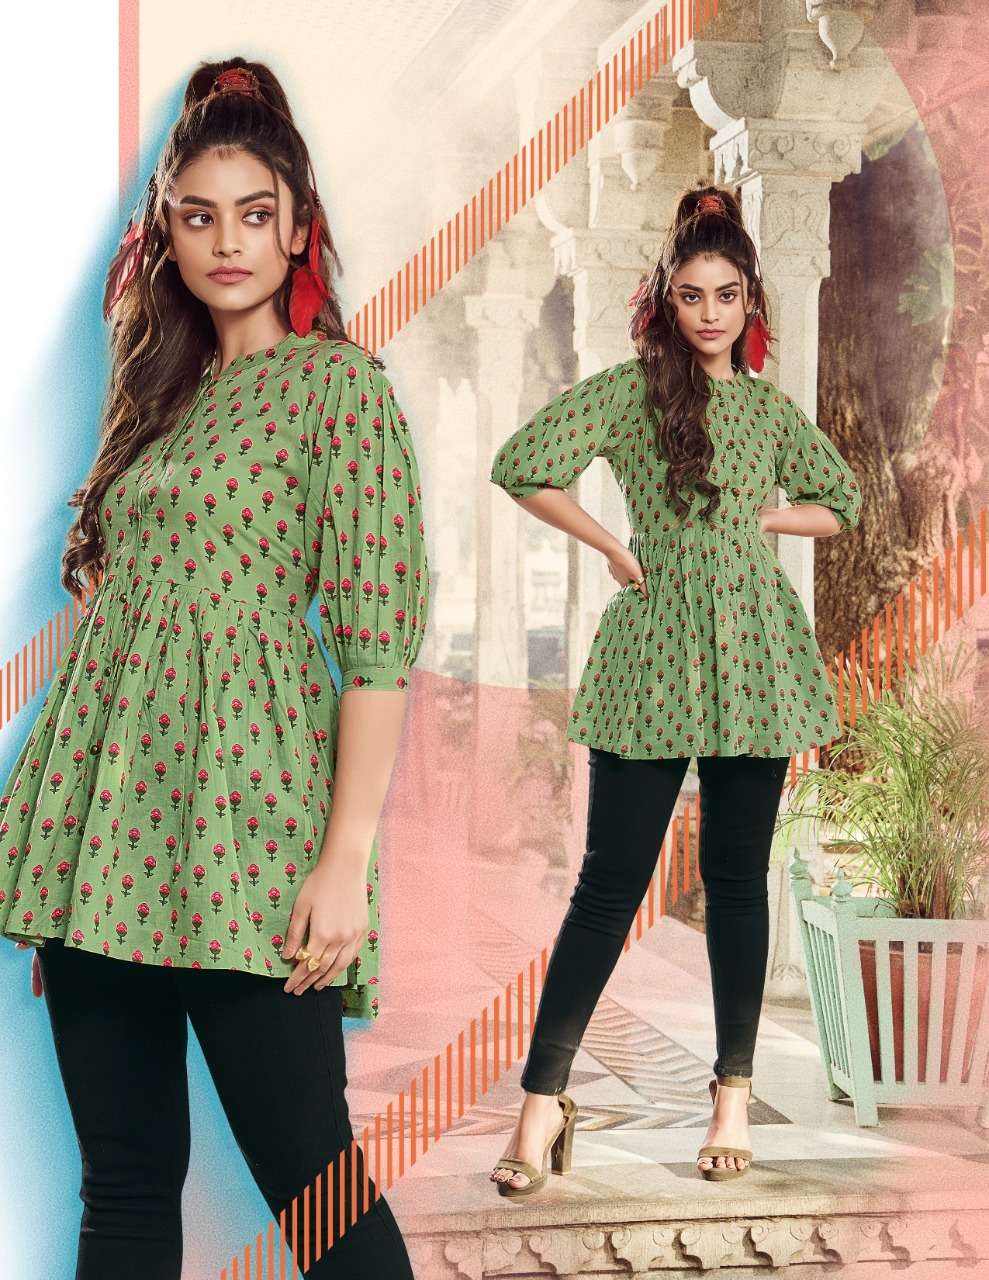 Flair Cotto Vol-1 By Passion Tree 1001 To 1008 Series Beautiful Stylish Fancy Colorful Casual Wear & Ethnic Wear Cotton Print Tops At Wholesale Price